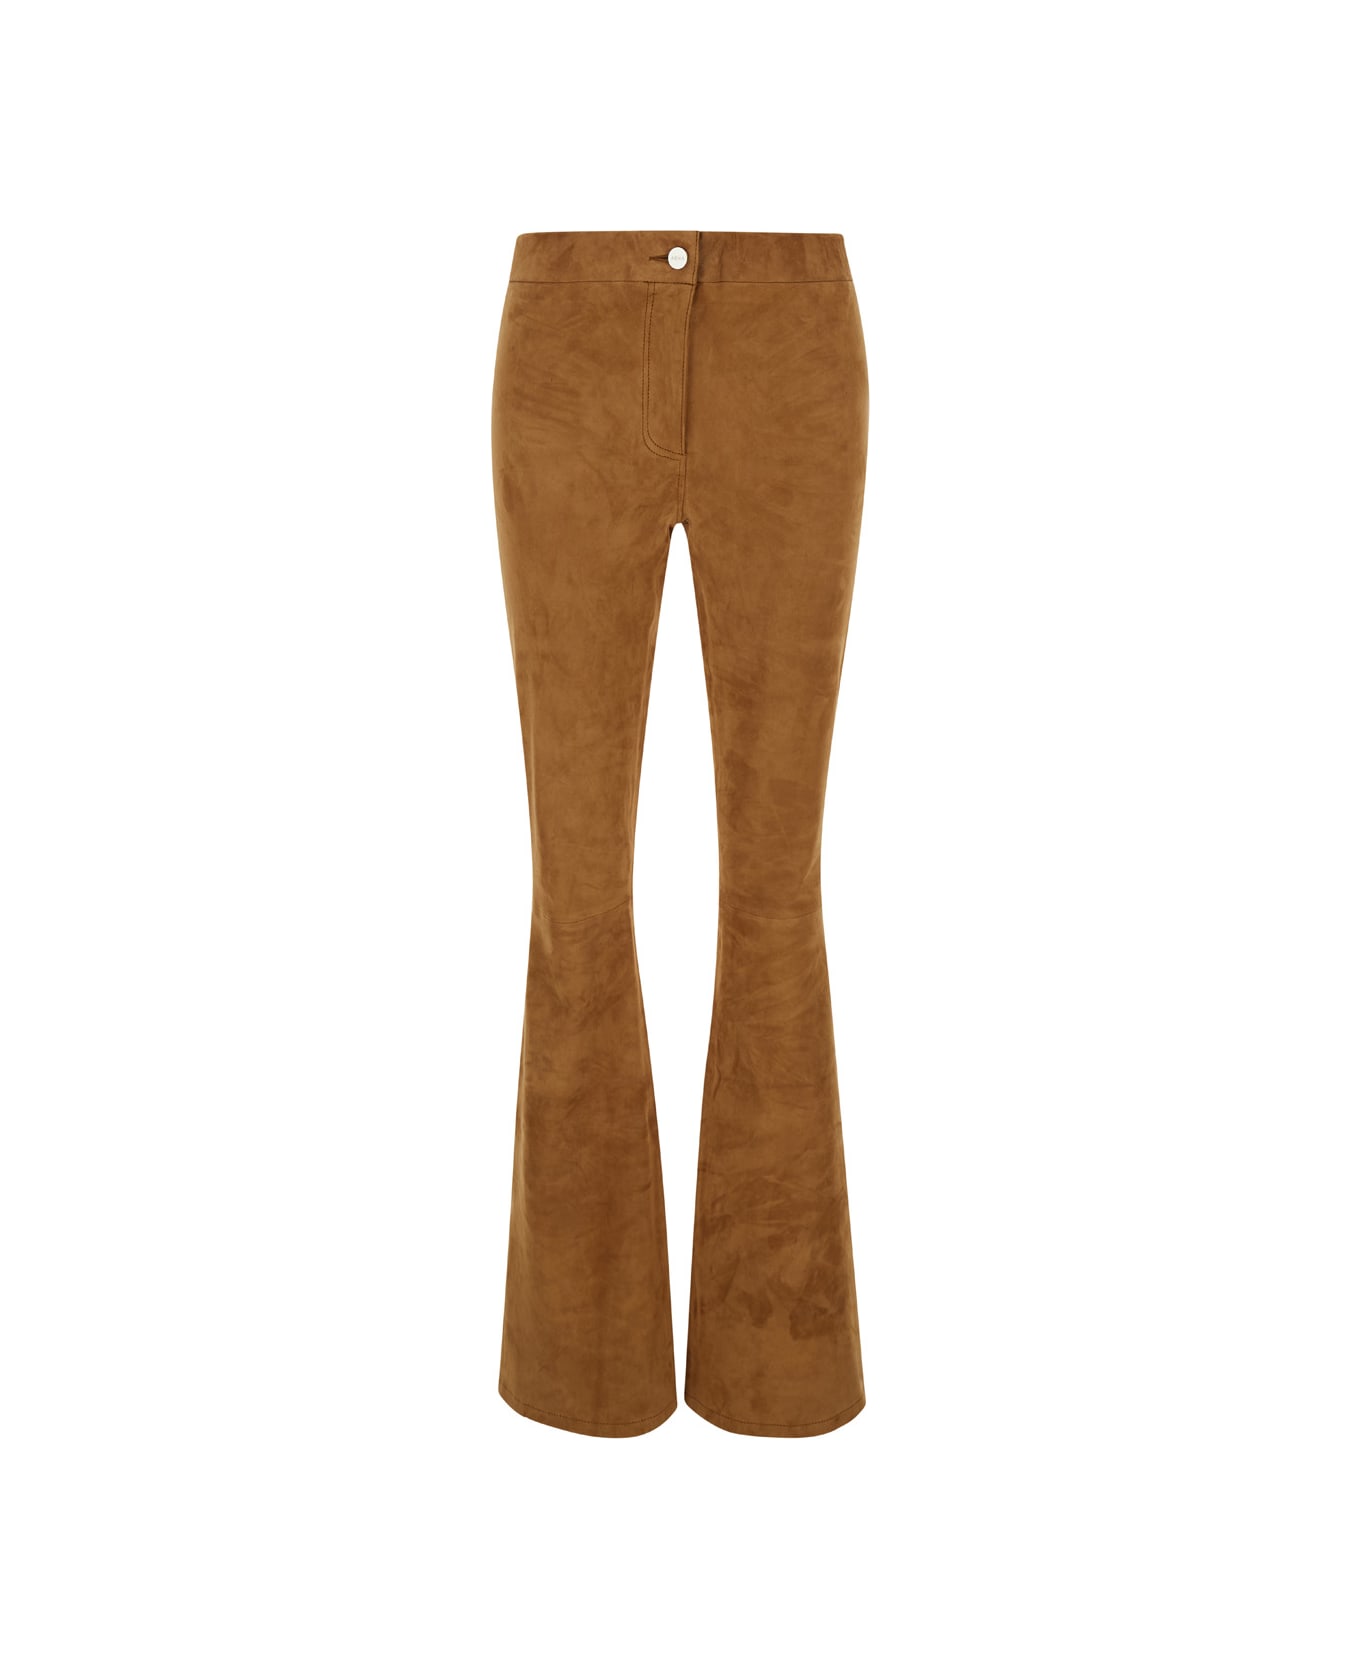 ARMA Black Flared Trousers In Suede Woman - Brown